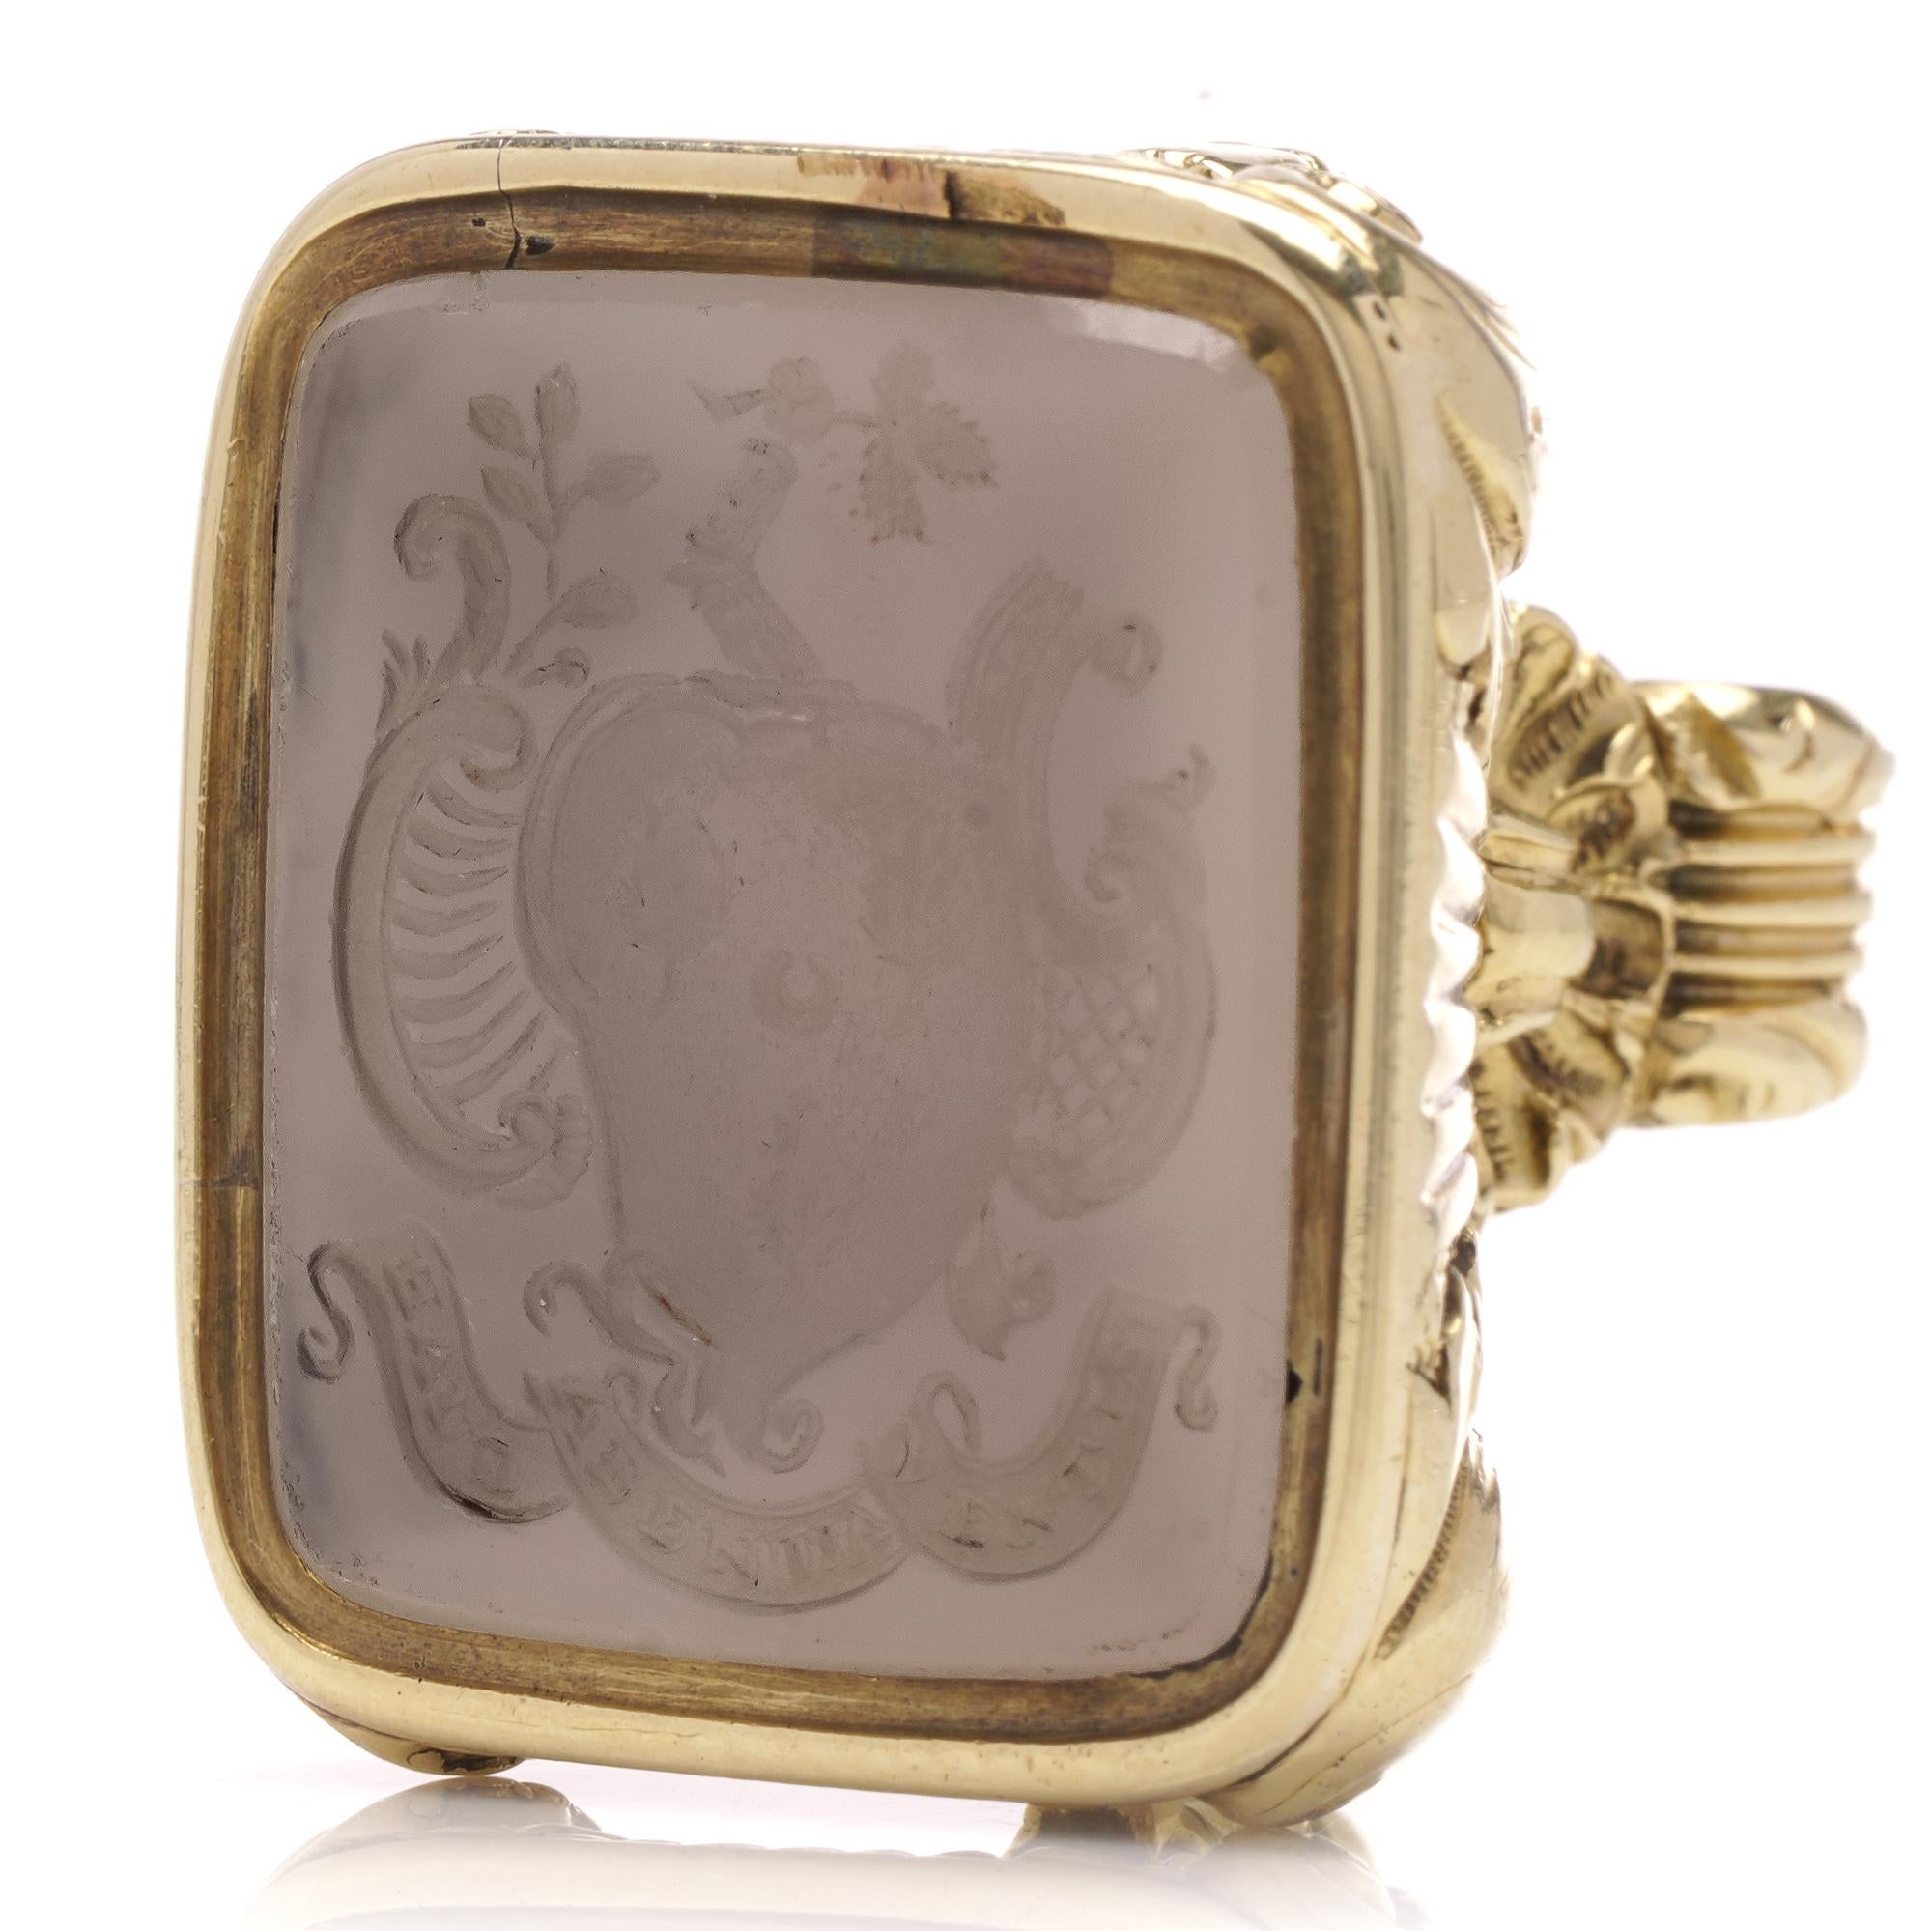 This exquisite 19th-century 15kt yellow gold seal fob/pendant, The seal features a sardonyx intaglio set in a 15kt yellow gold mount, showcasing a carved stone depicting Irving surname coat of arms with a family motto: ' Haud labentia ventis